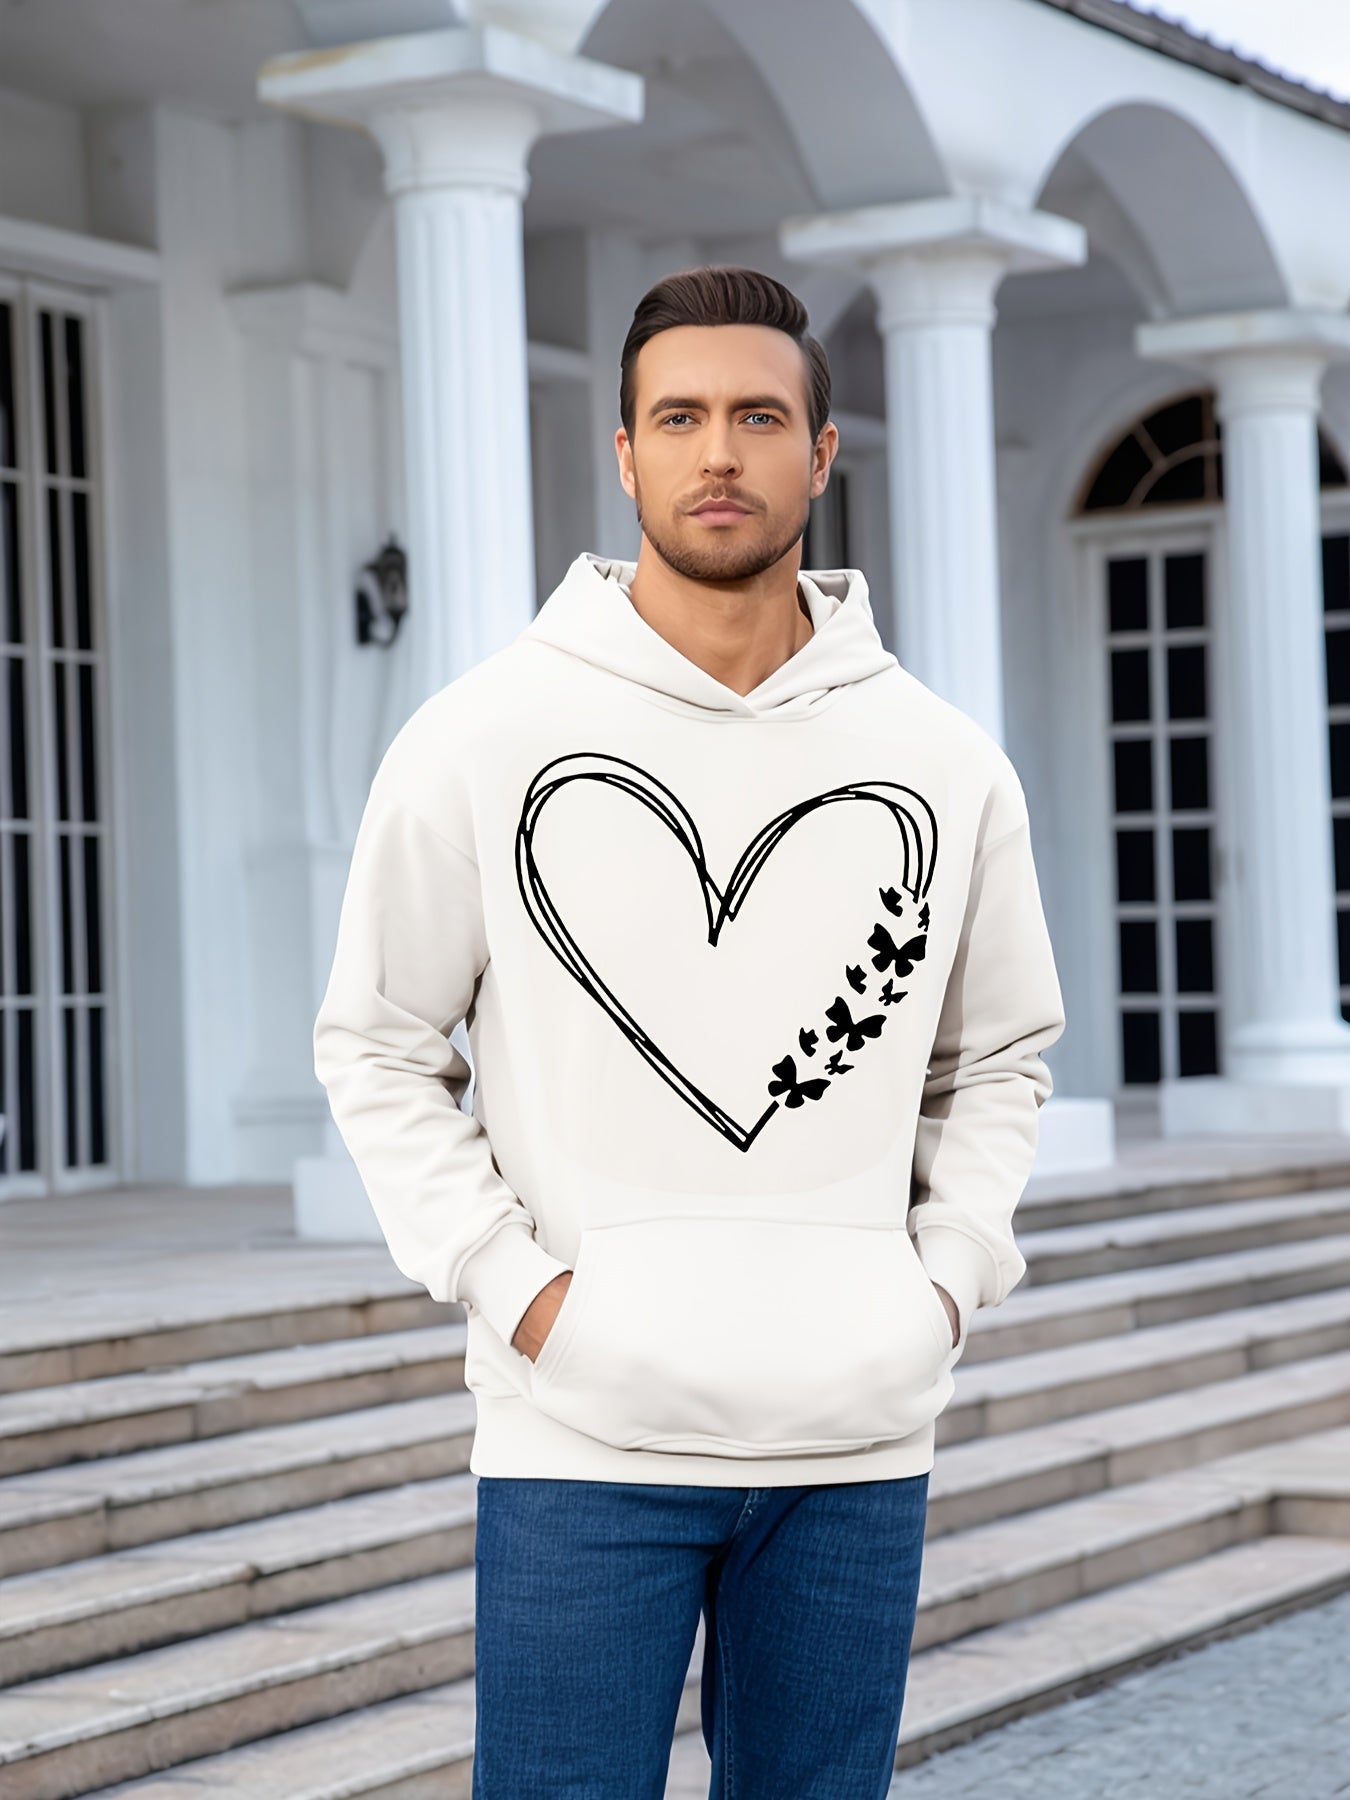 Hearts Print Men's Pullover Round Neck Long Sleeve HOODED Sweatshirt Pattern Loose Casual Top For Autumn Winter Men's Clothing As Gifts